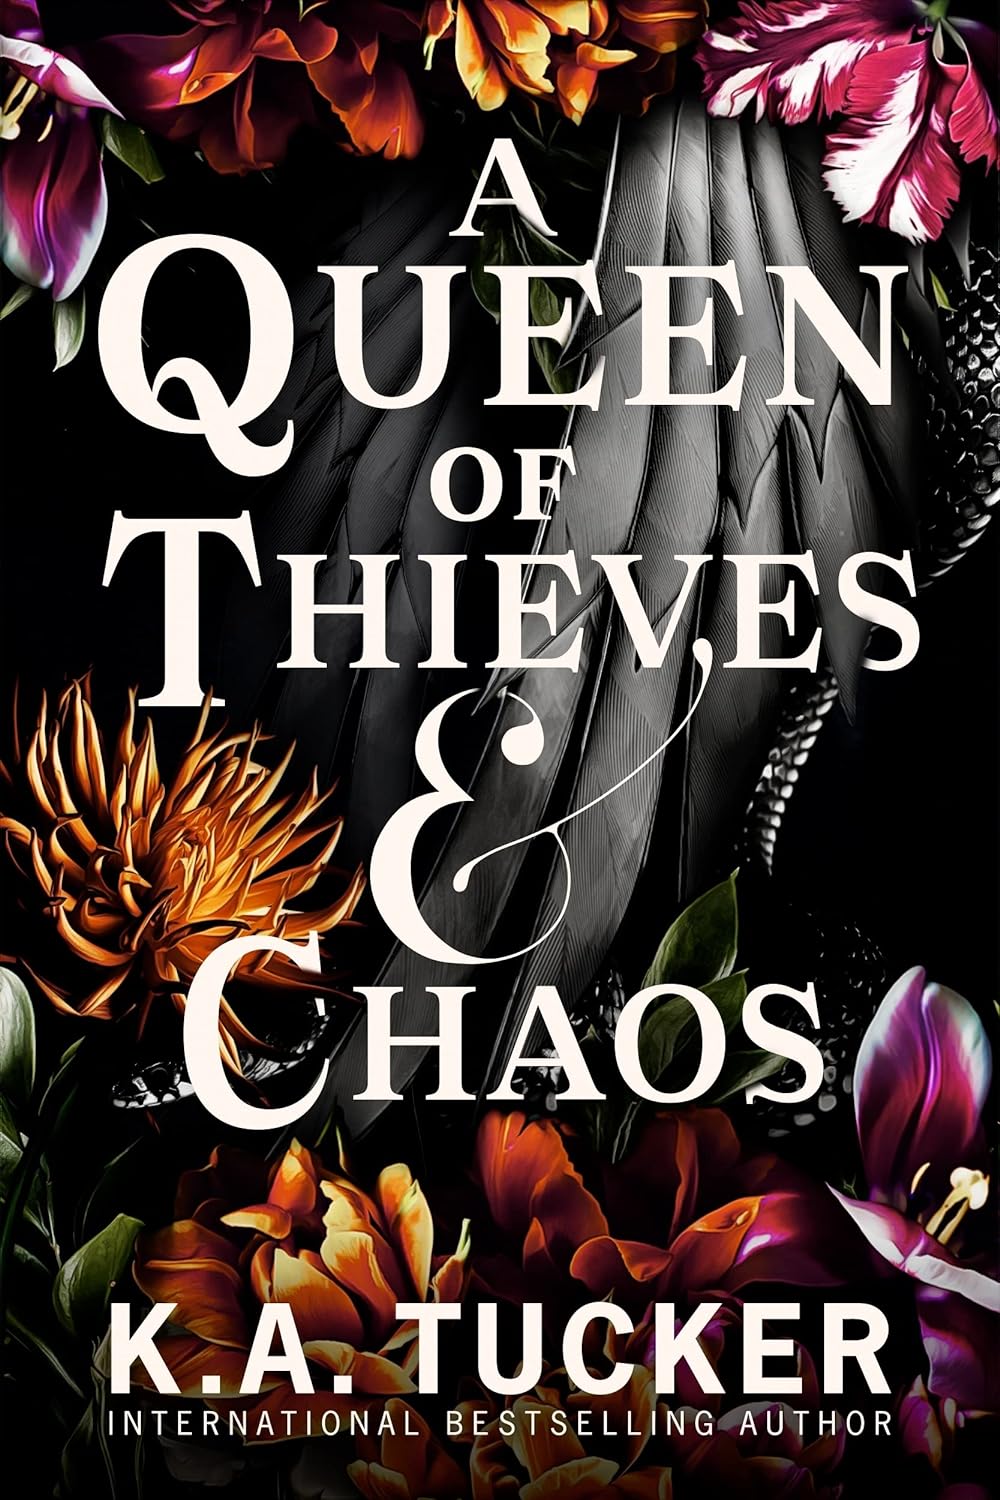 A Queen of Thieves and Chaos Paperback